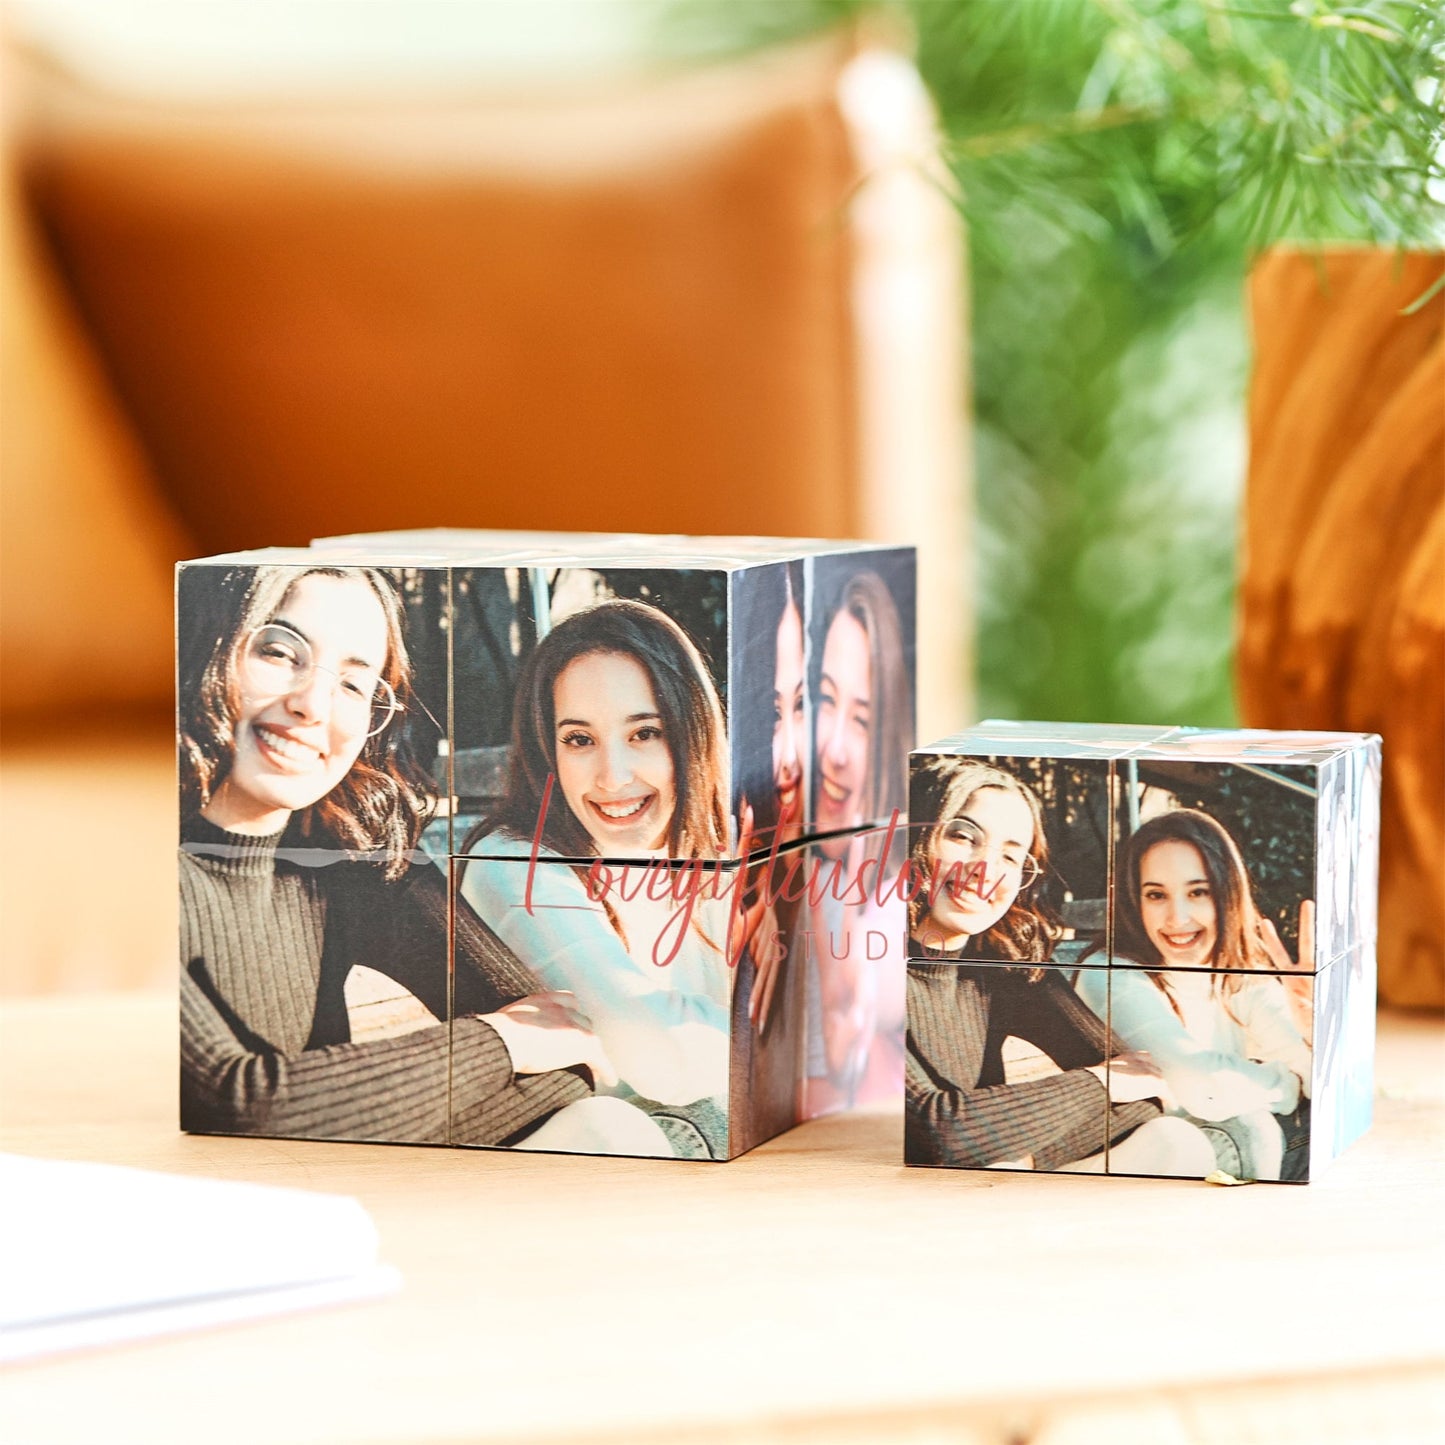 Infinity Photo Cube custom gift, Memory photo cube, family photo cube, Folding Photo Cube, Birthday Gift For Her Him, couple gift cube